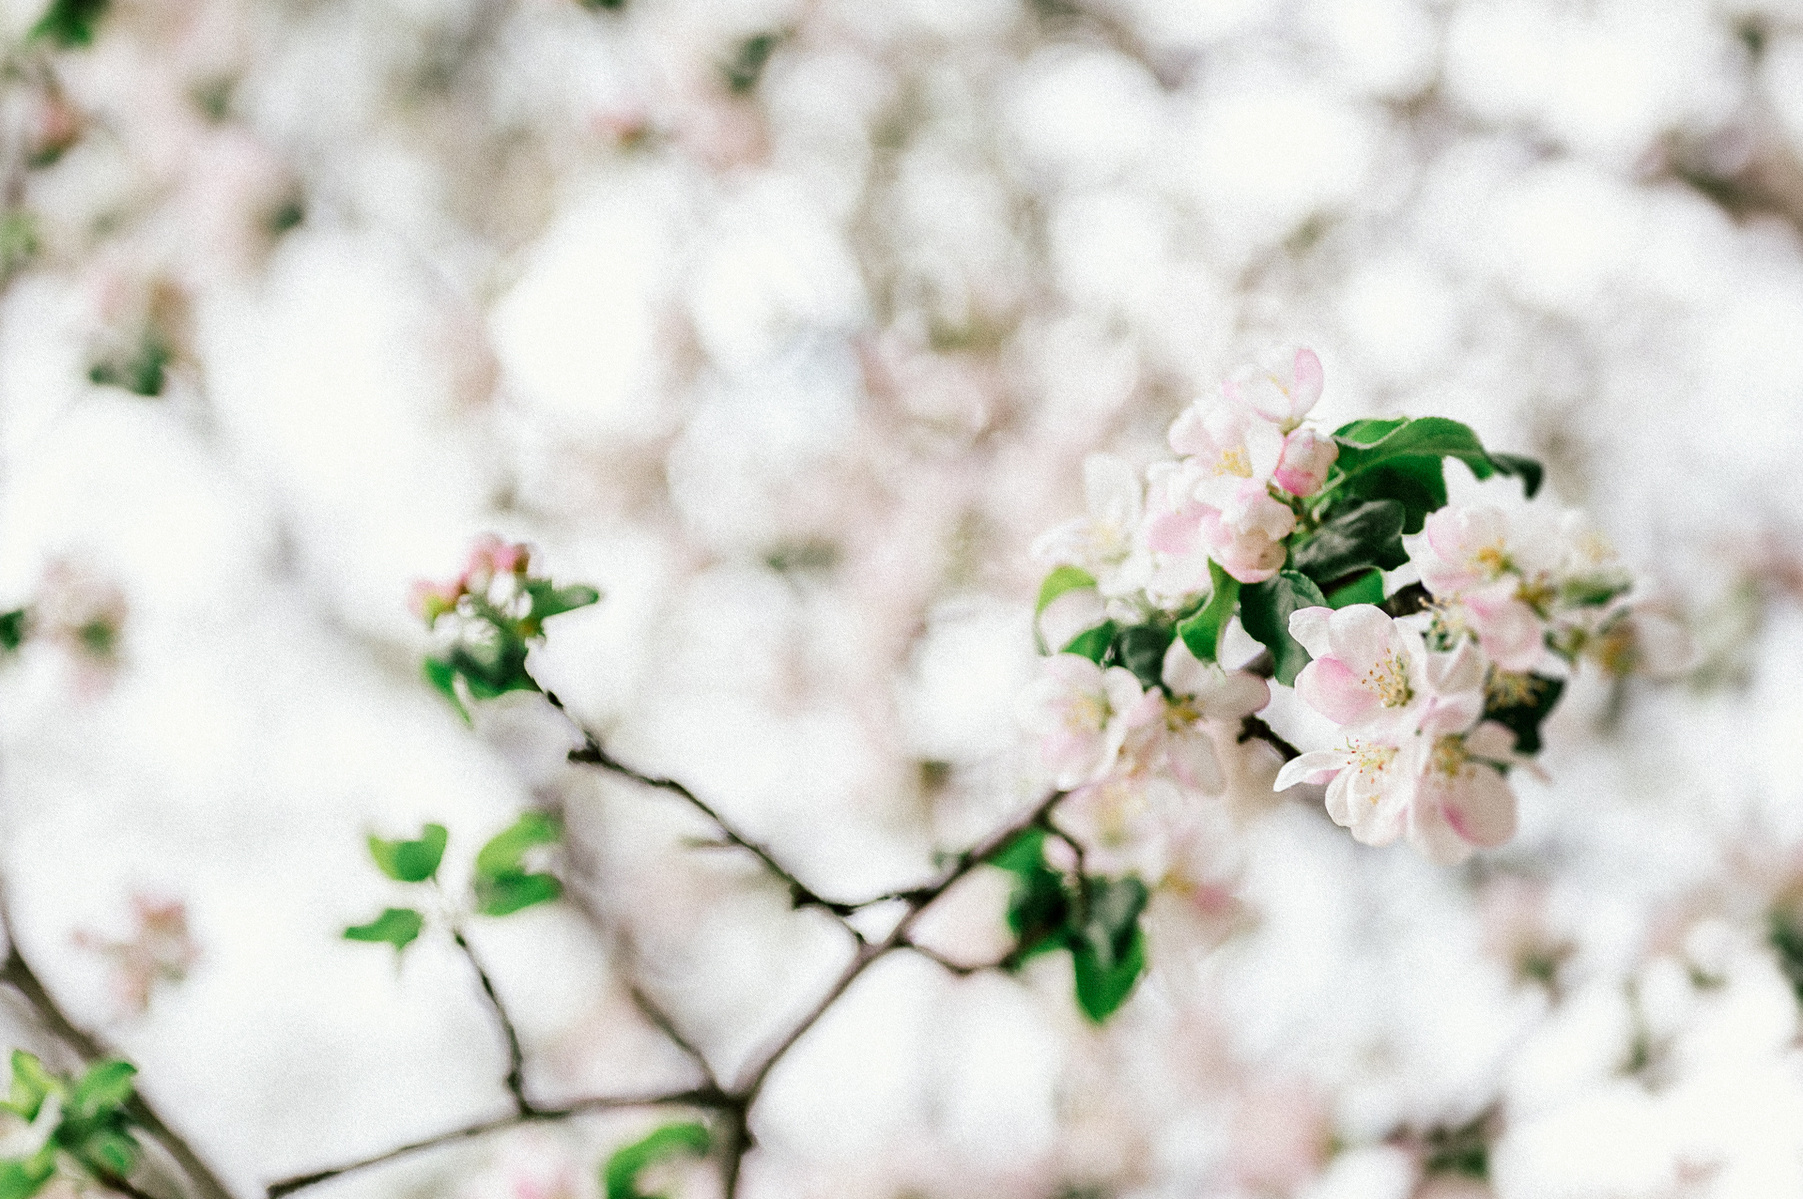 a branch of a tree with white and pink flowers in boston's arnold arboretum park